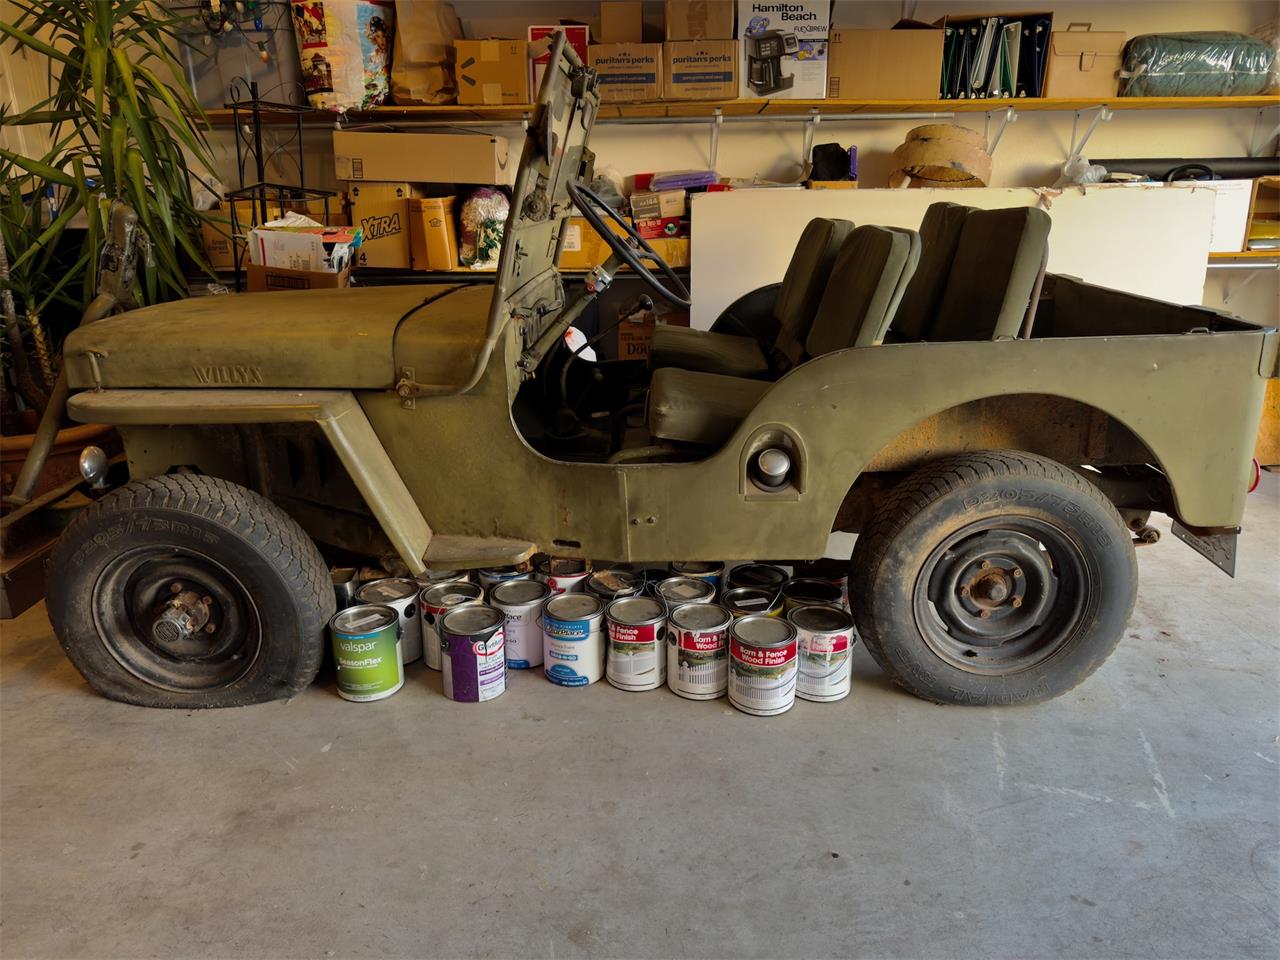 For Sale: 1948 Jeep Willys in Springdale, Arkansas for sale in Springdale, AR